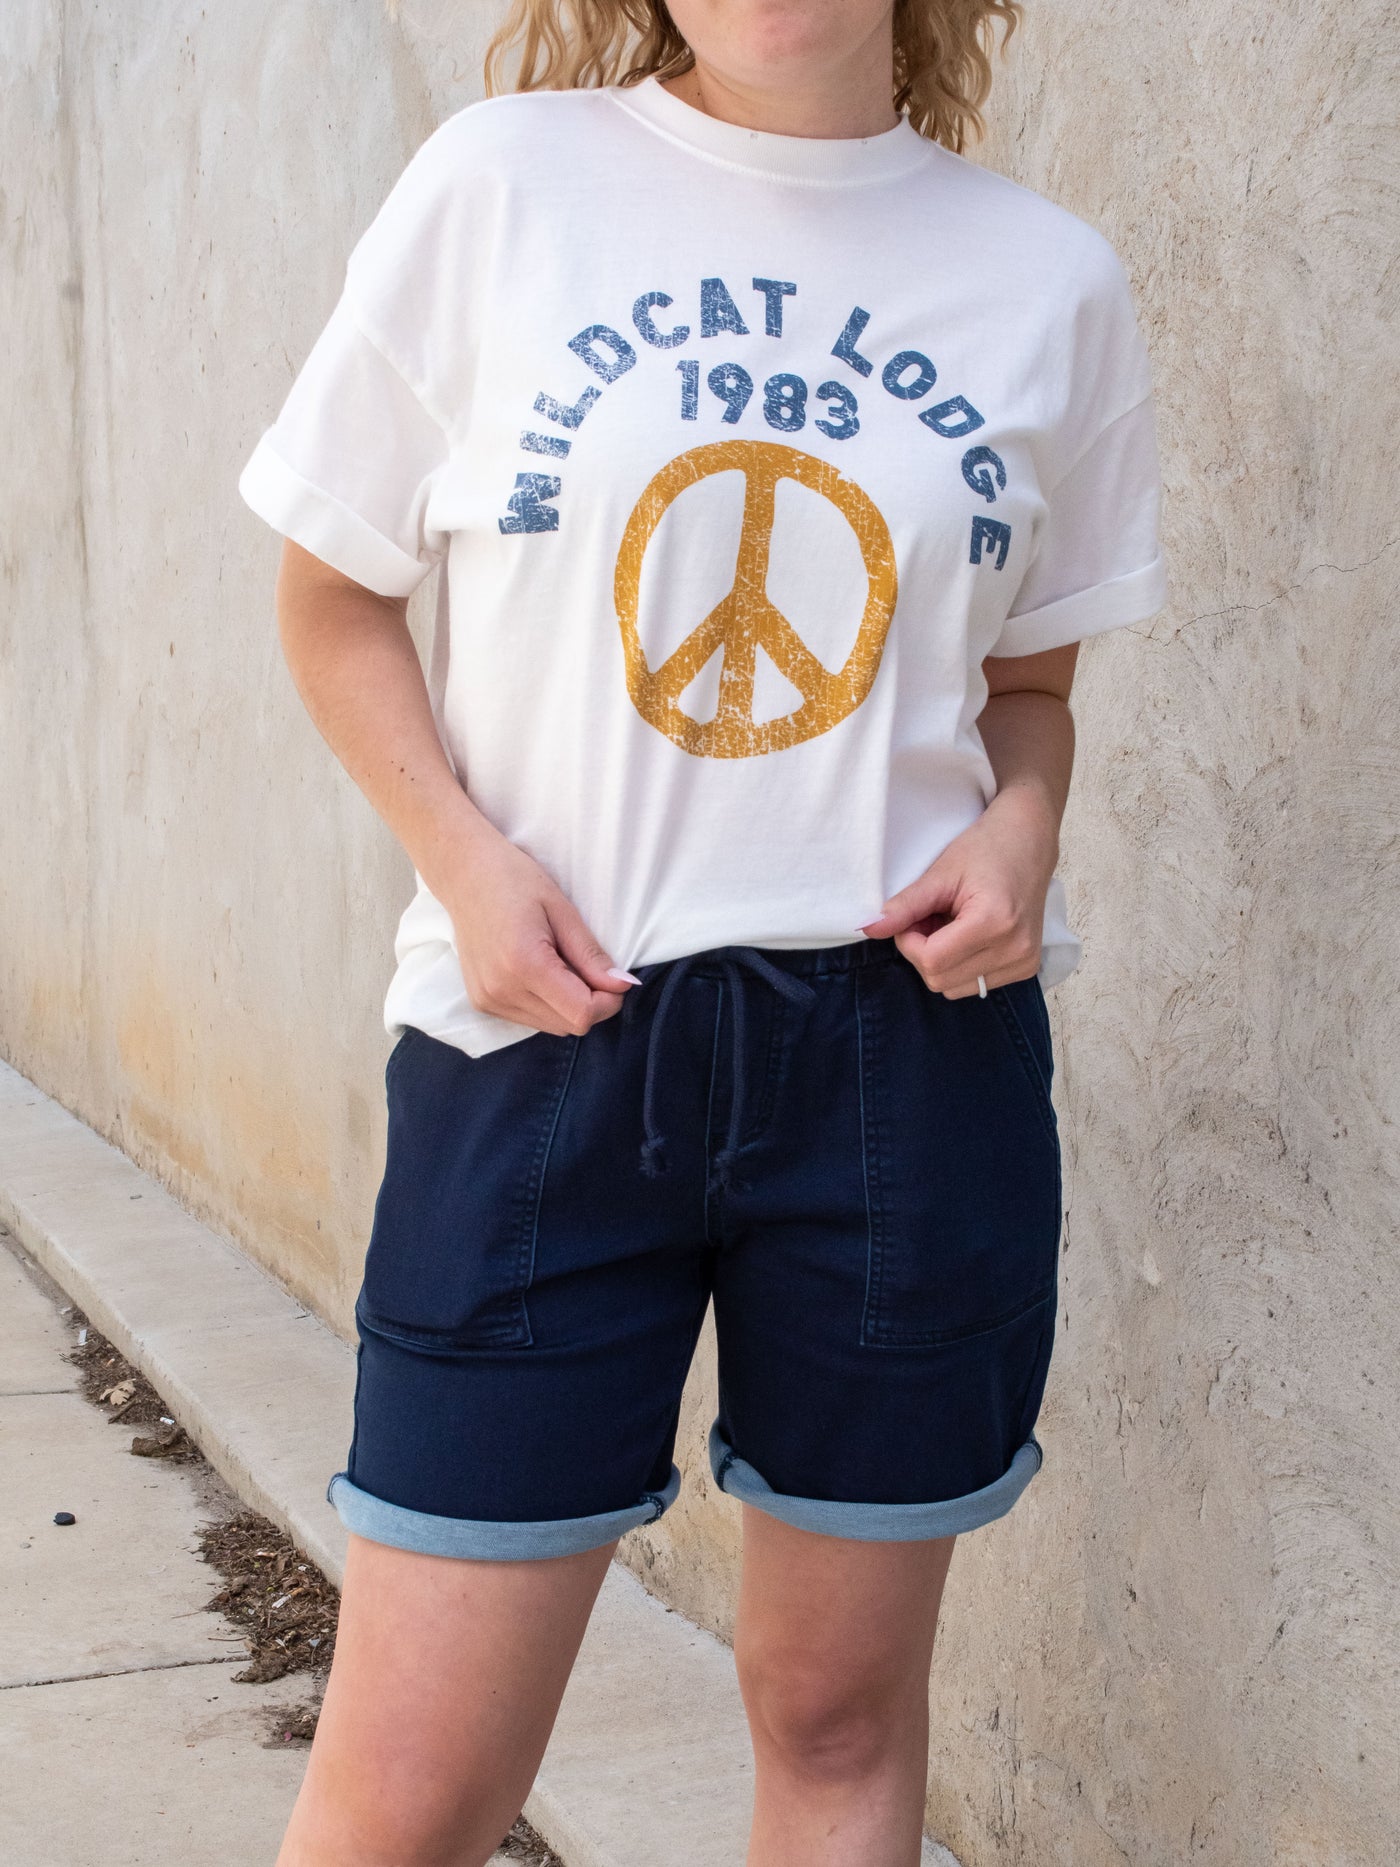 A model wearing a pair of dark wash drawstring sailor shorts with a white tee with a peach sign on it and white sneakers.